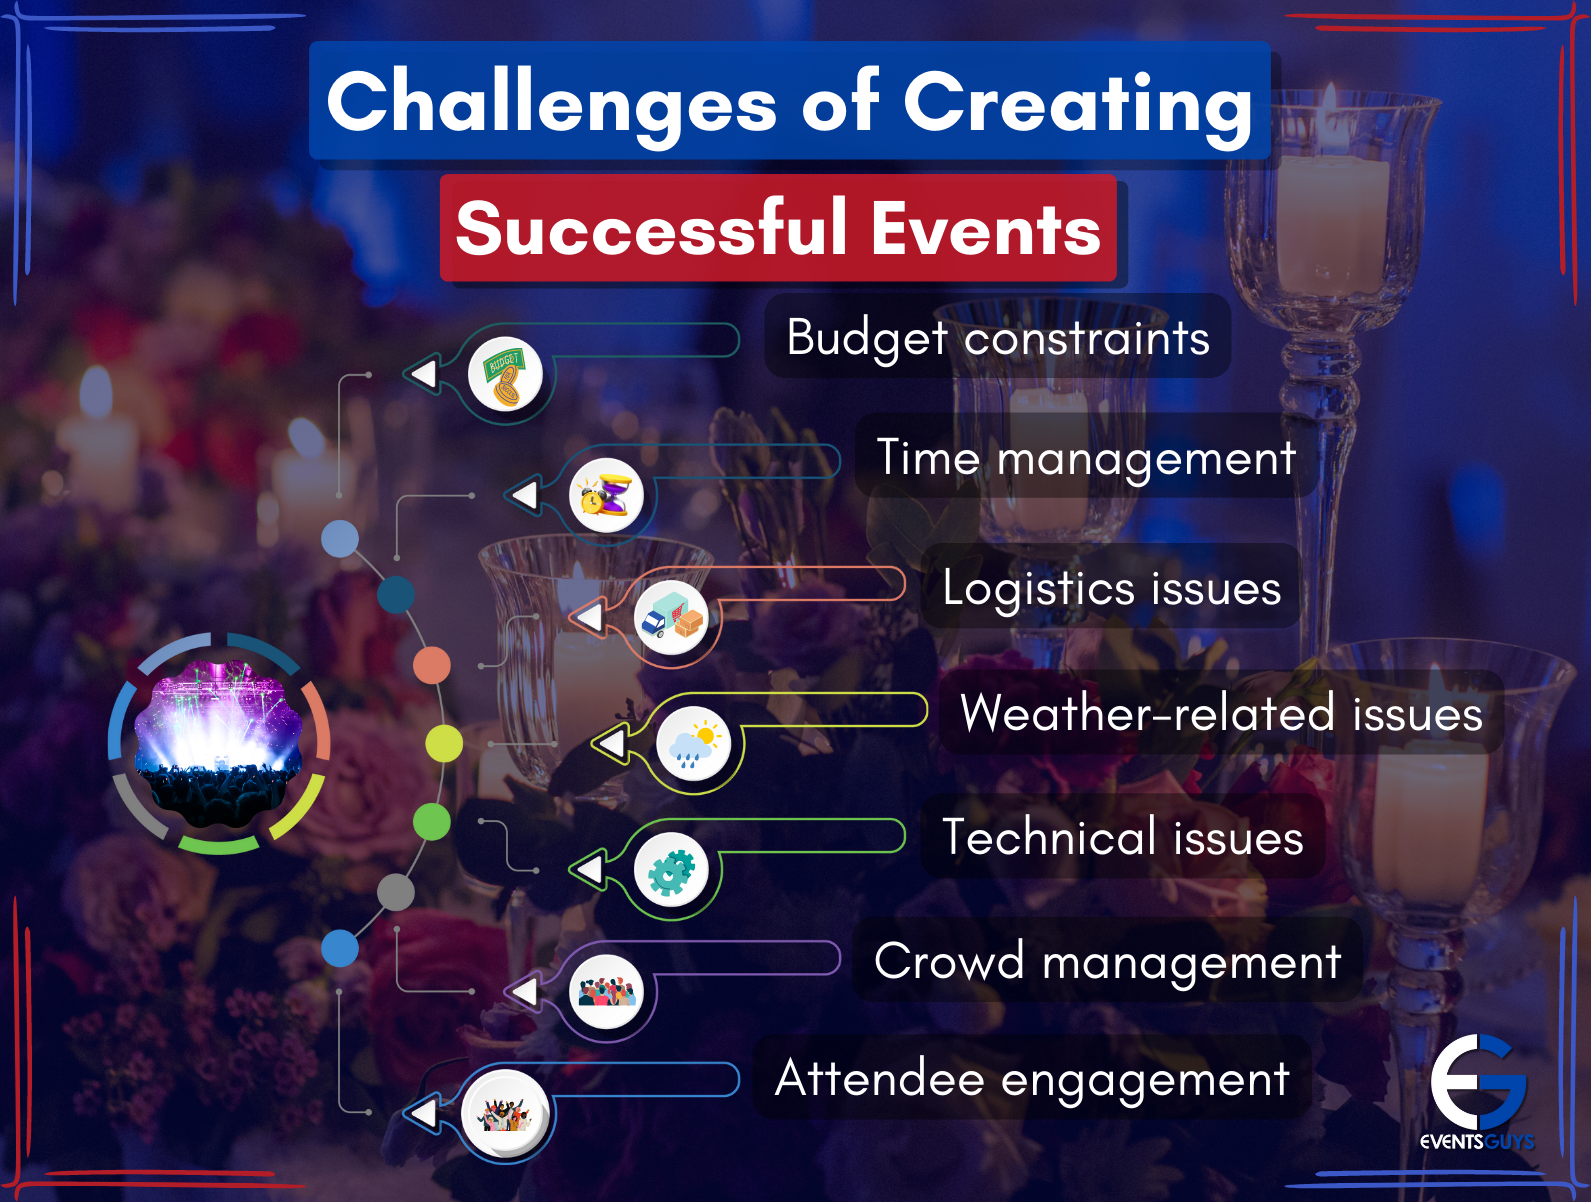 Challenges faced by event companies